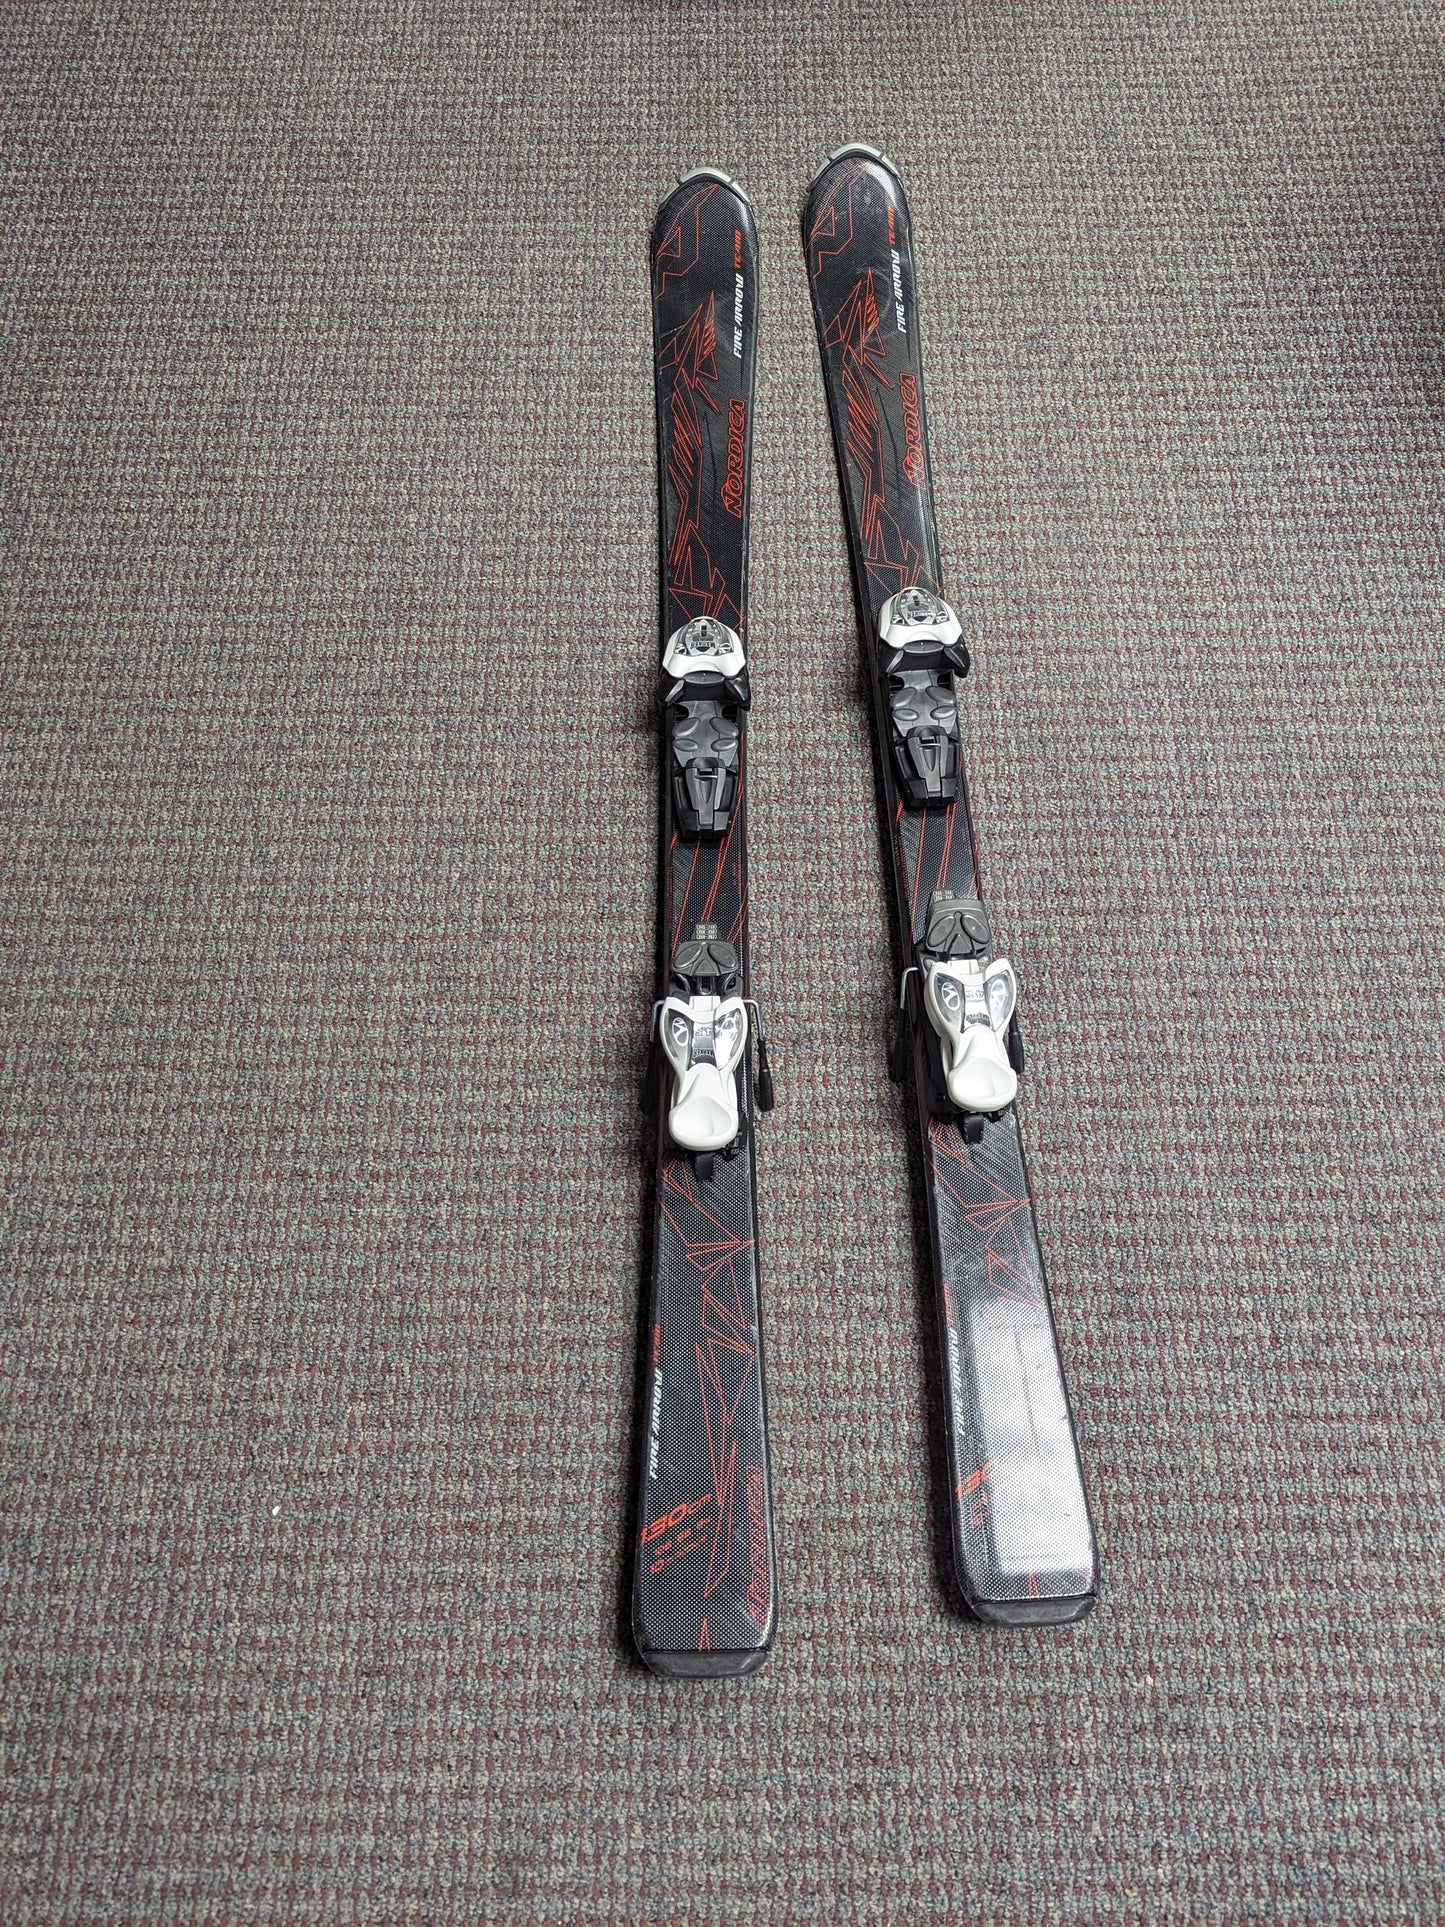 Nordica Fire Arrow Team Skis w/Marker Bindings Size 130 cm Color Black Condition Used